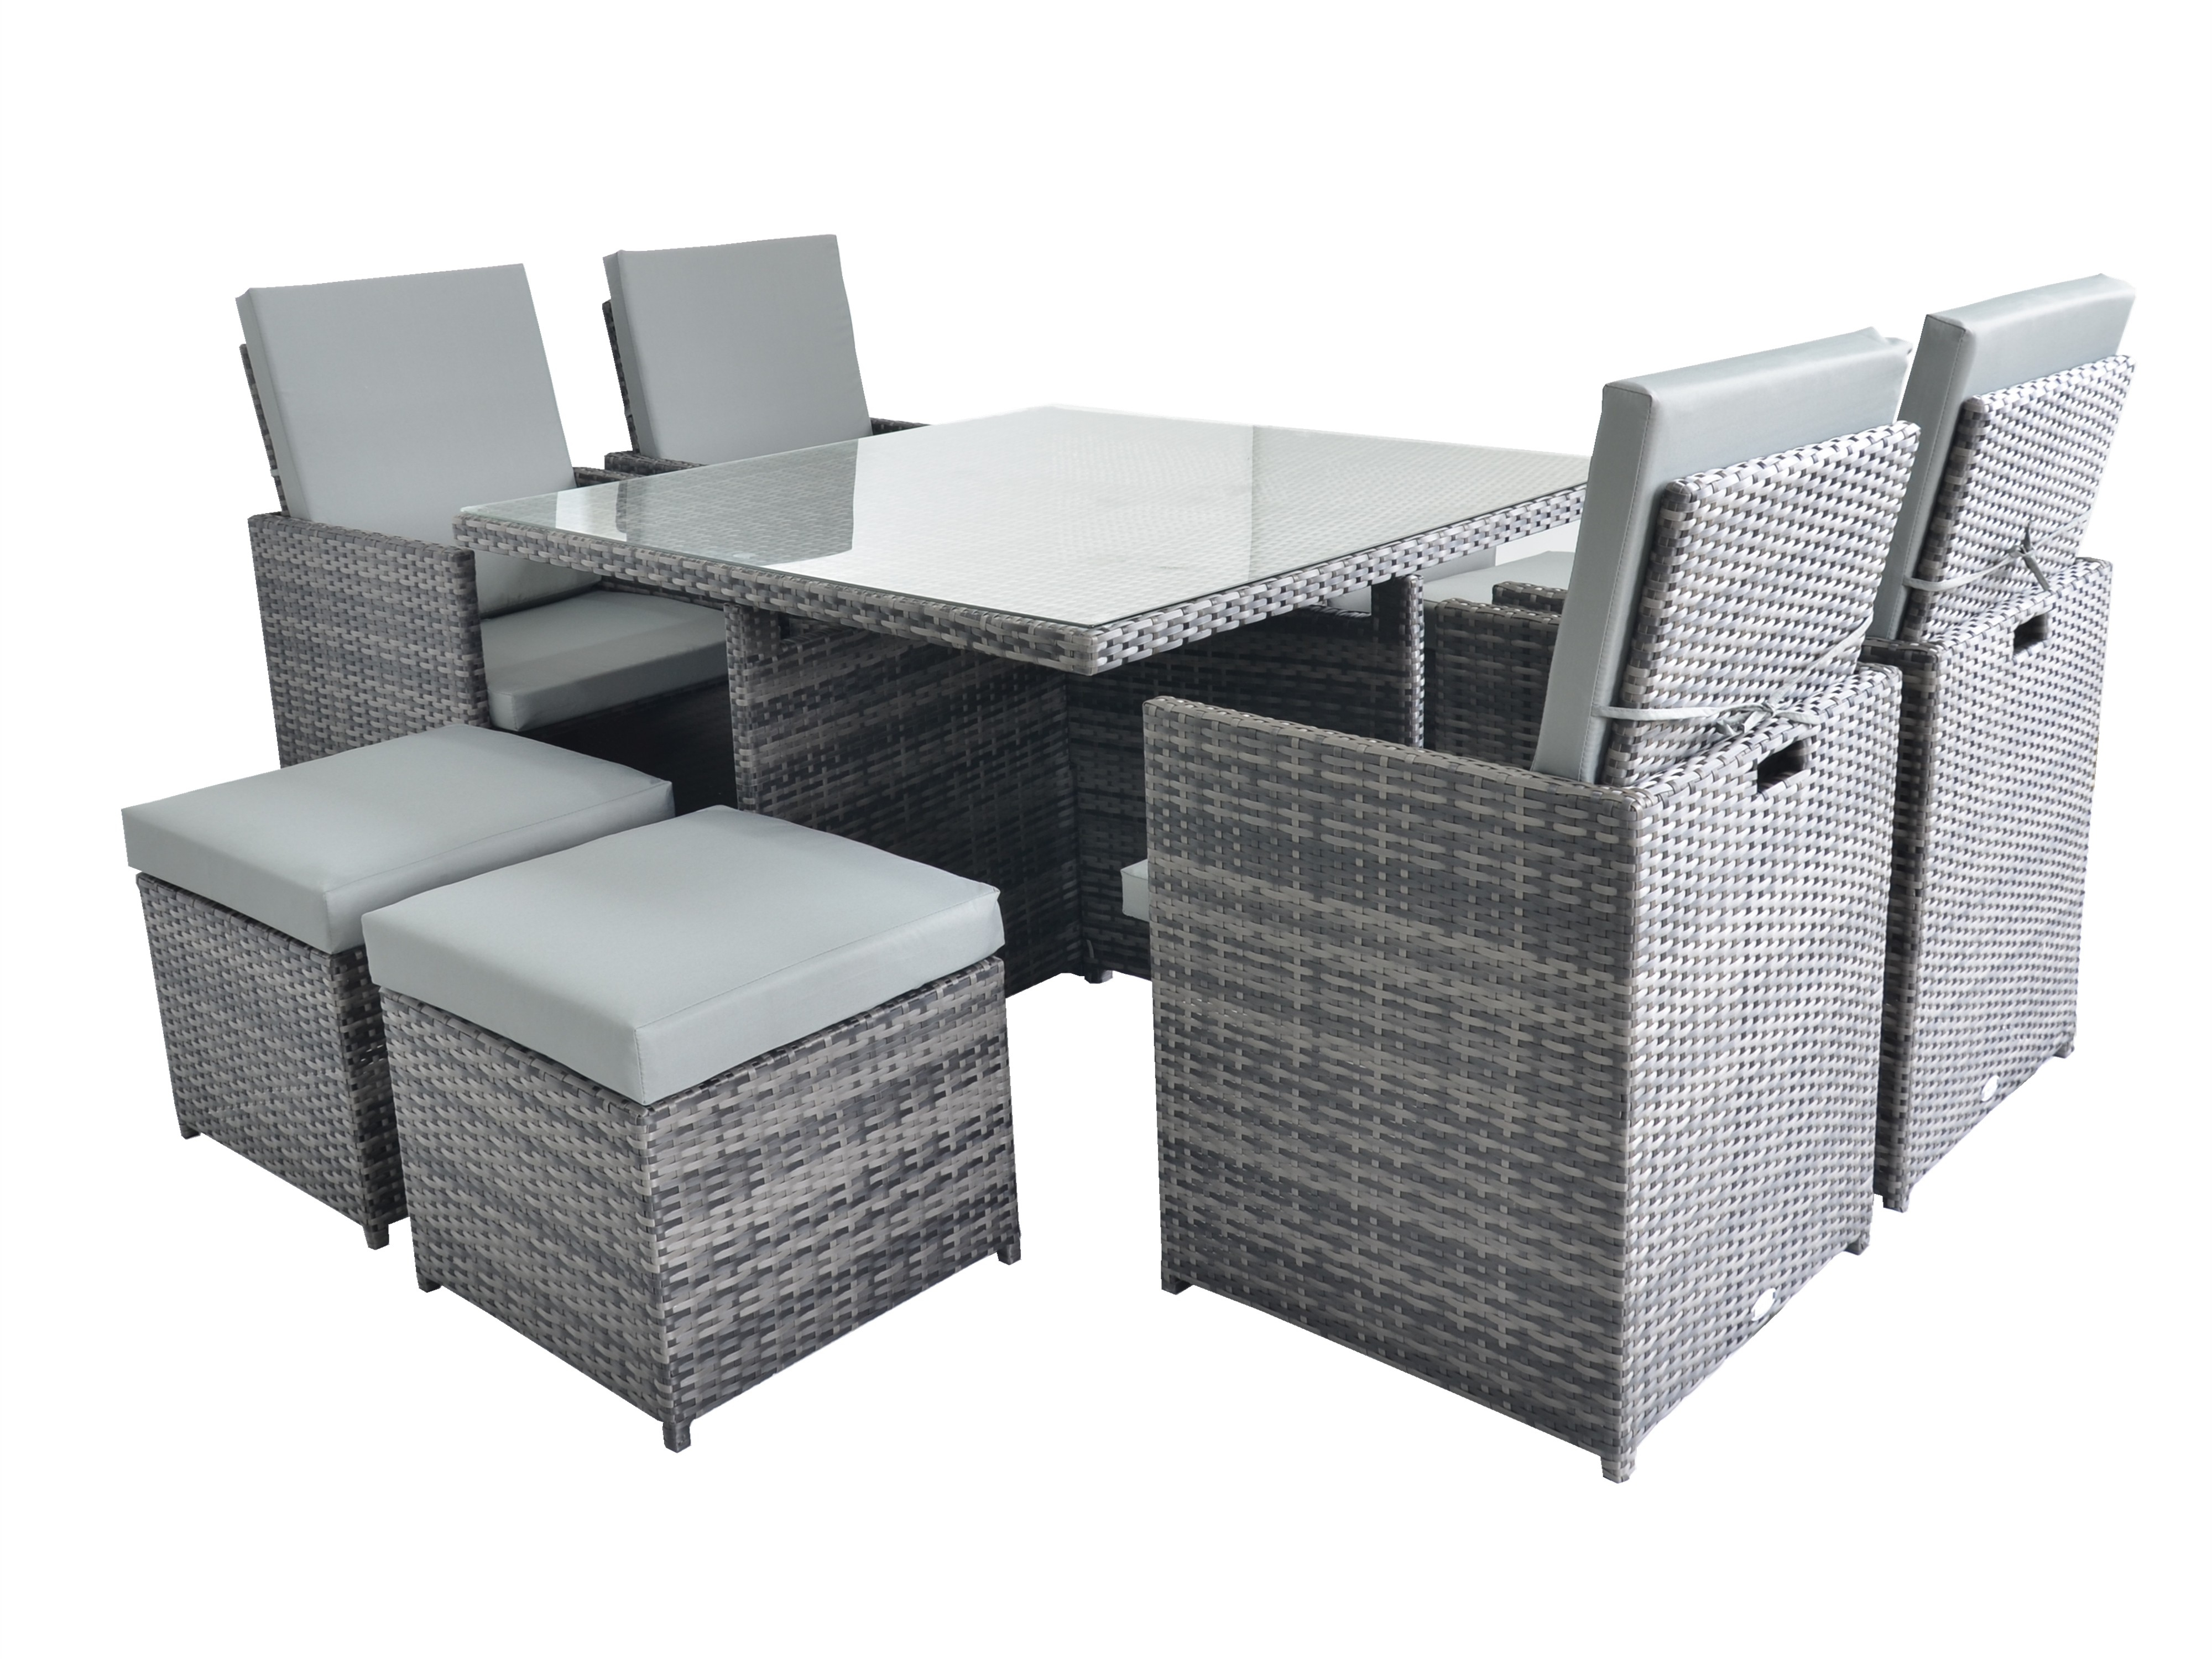 Rattan Fairy Seville 4 Seat Deluxe Garden Furniture Cube Set With 4 Footstools Free Cover for size 4000 X 3000